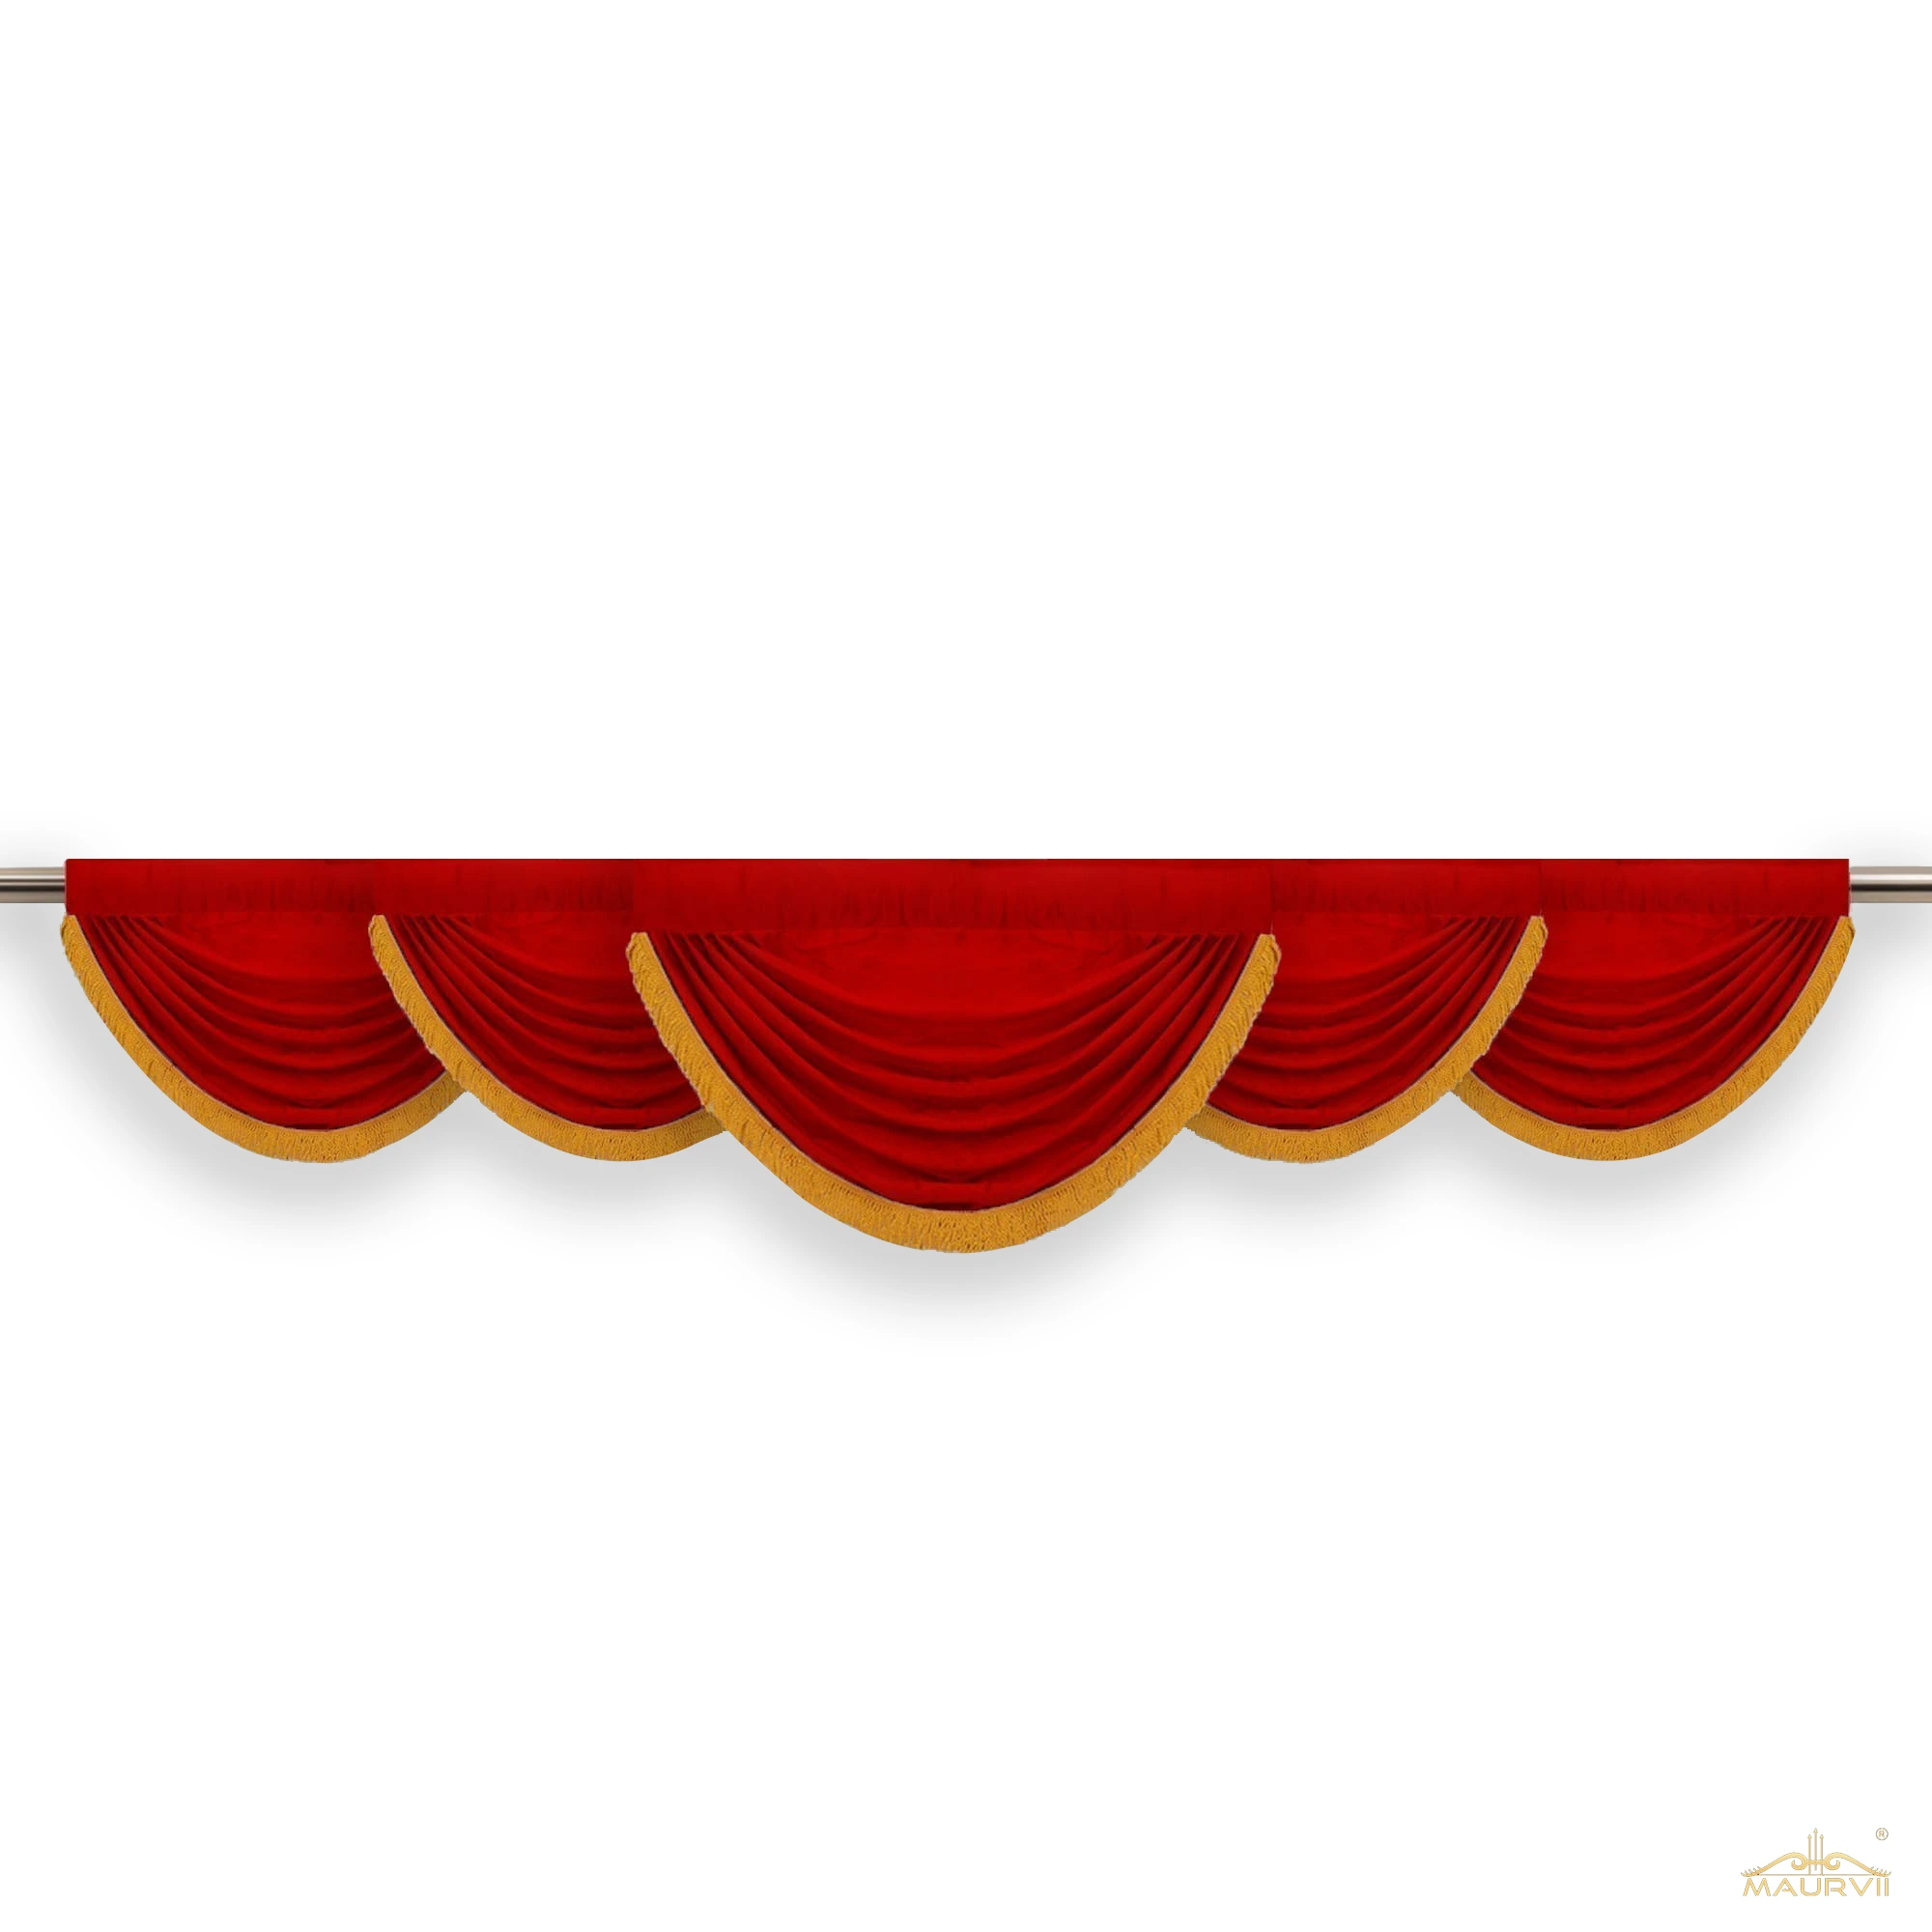 Red valance for church decoration